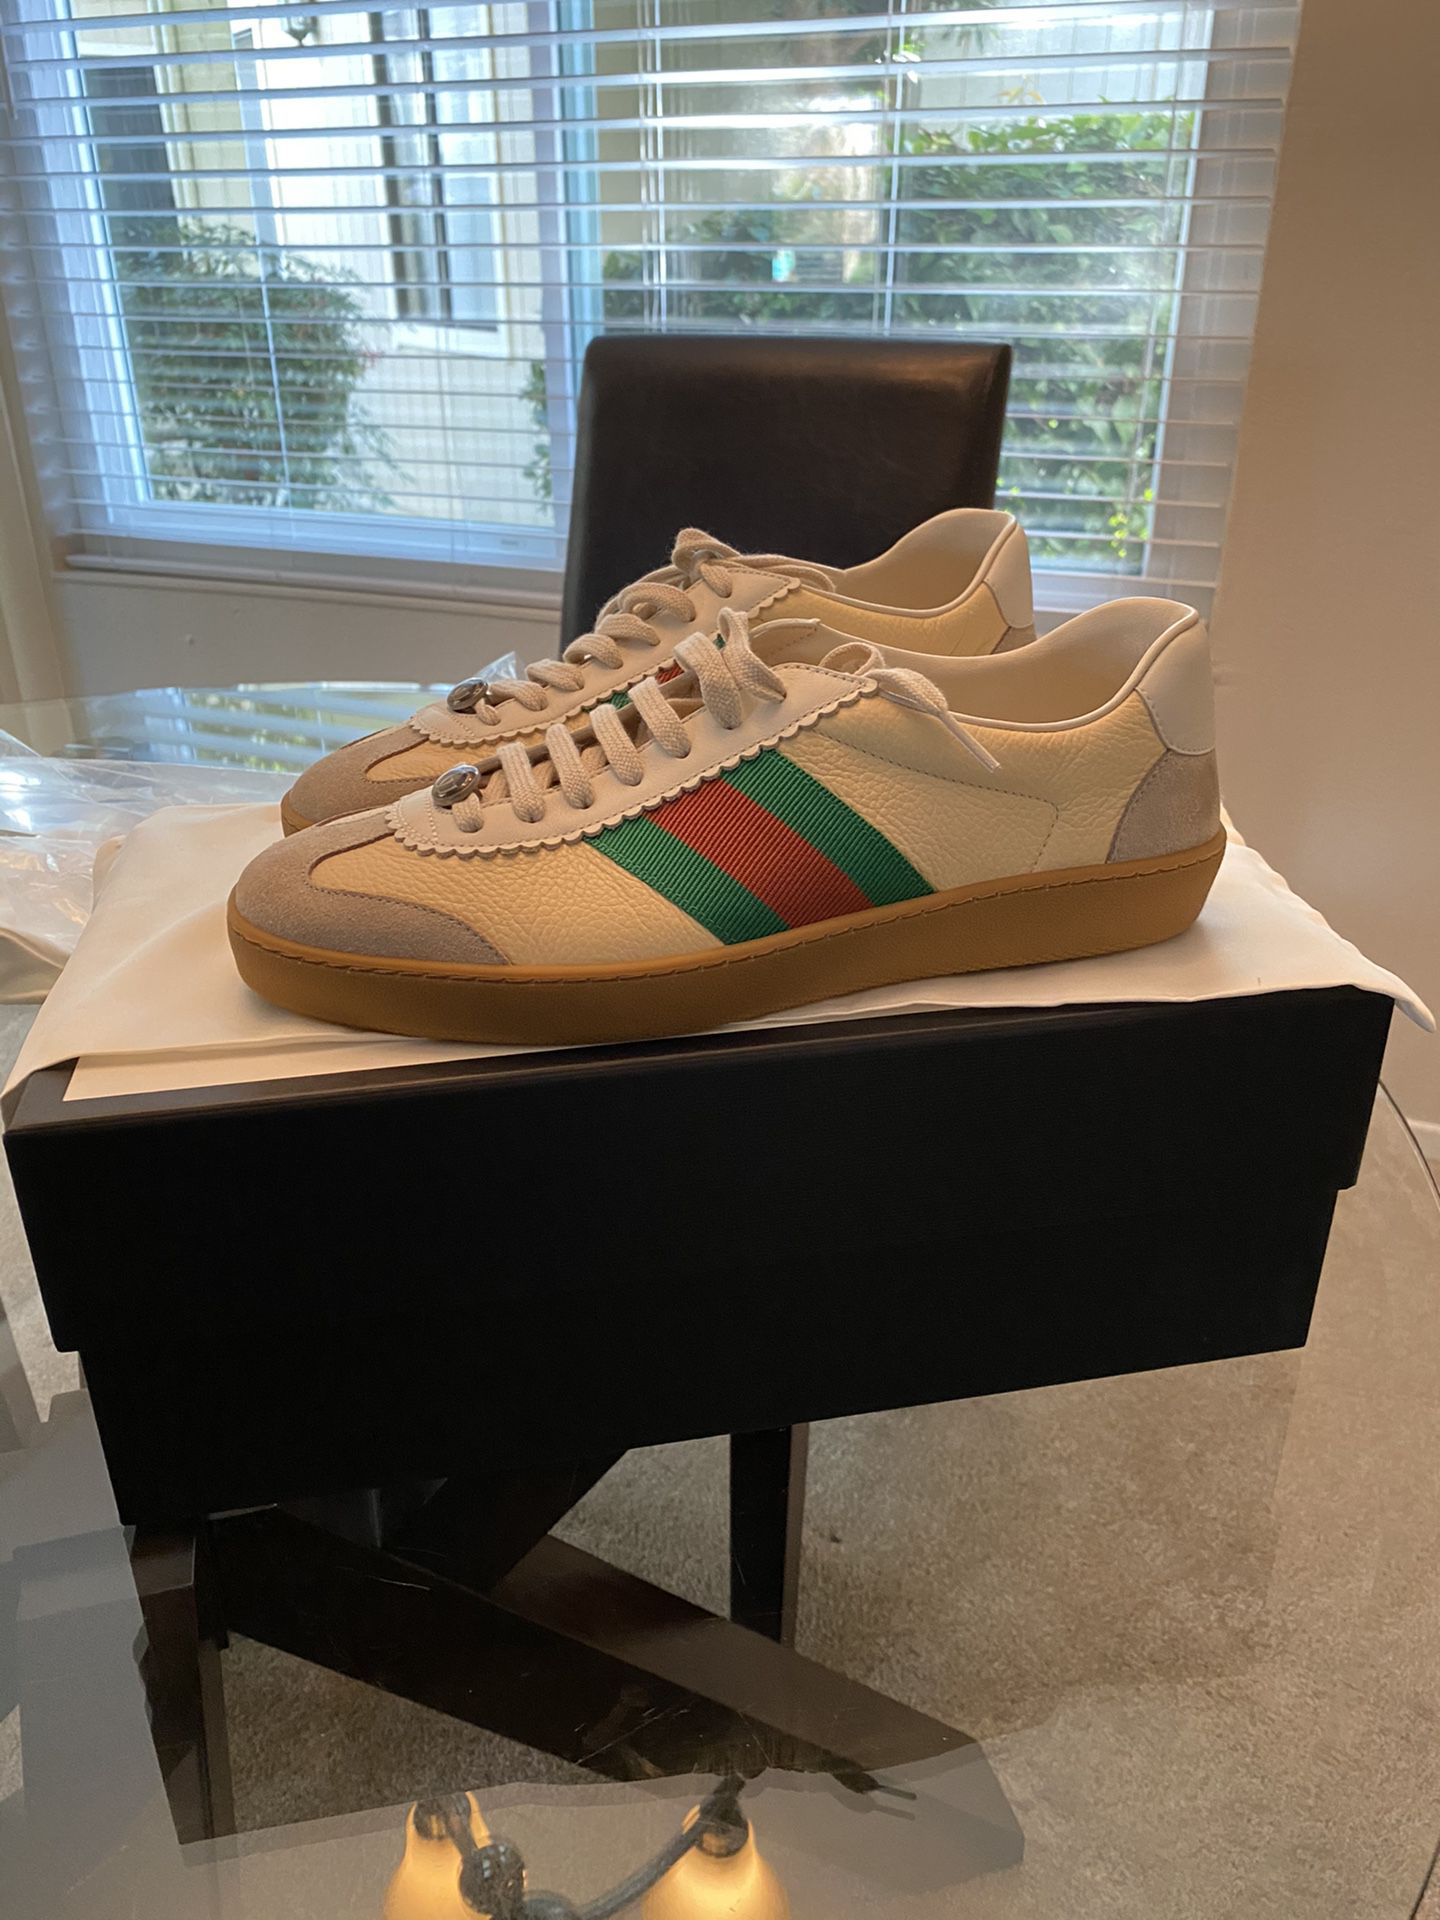 Brand new Men’s Gucci’s shoes size 9.5